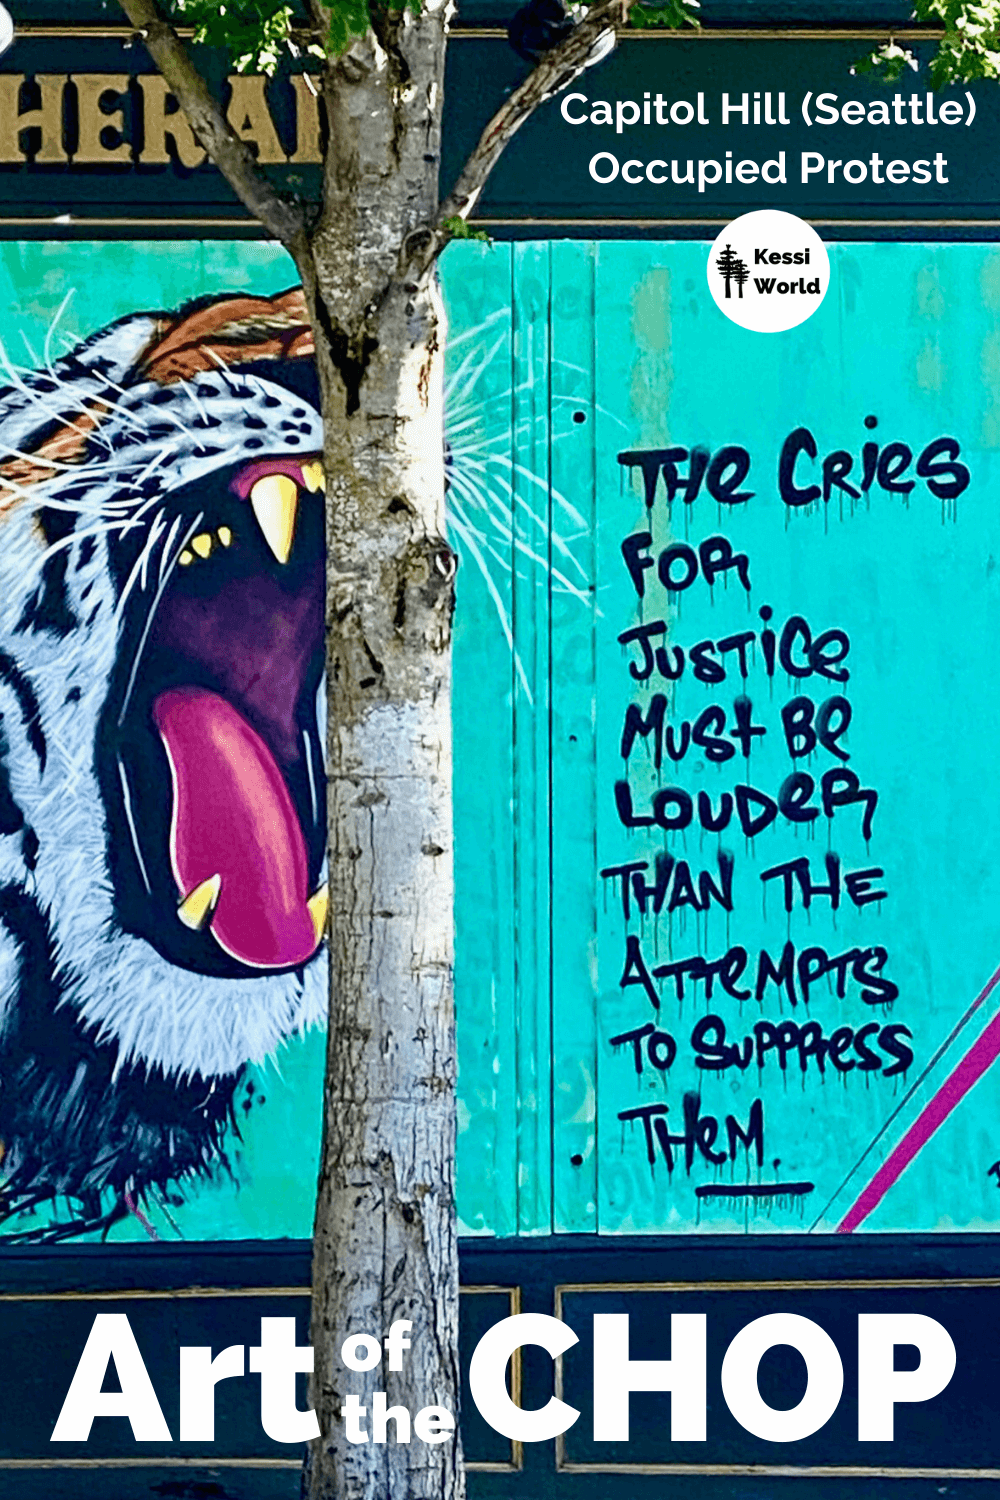 This photo was taken near the CHOP zone in the Seattle neighborhood of Capitol Hill. CHOP stands for Capitol Hill Occupied Protest. This mural is painted on the side of a building with an aqua color background and a tiger ferociously roaring. The black lettering says, The cries for justice must be louder than the attempt to suppress them.